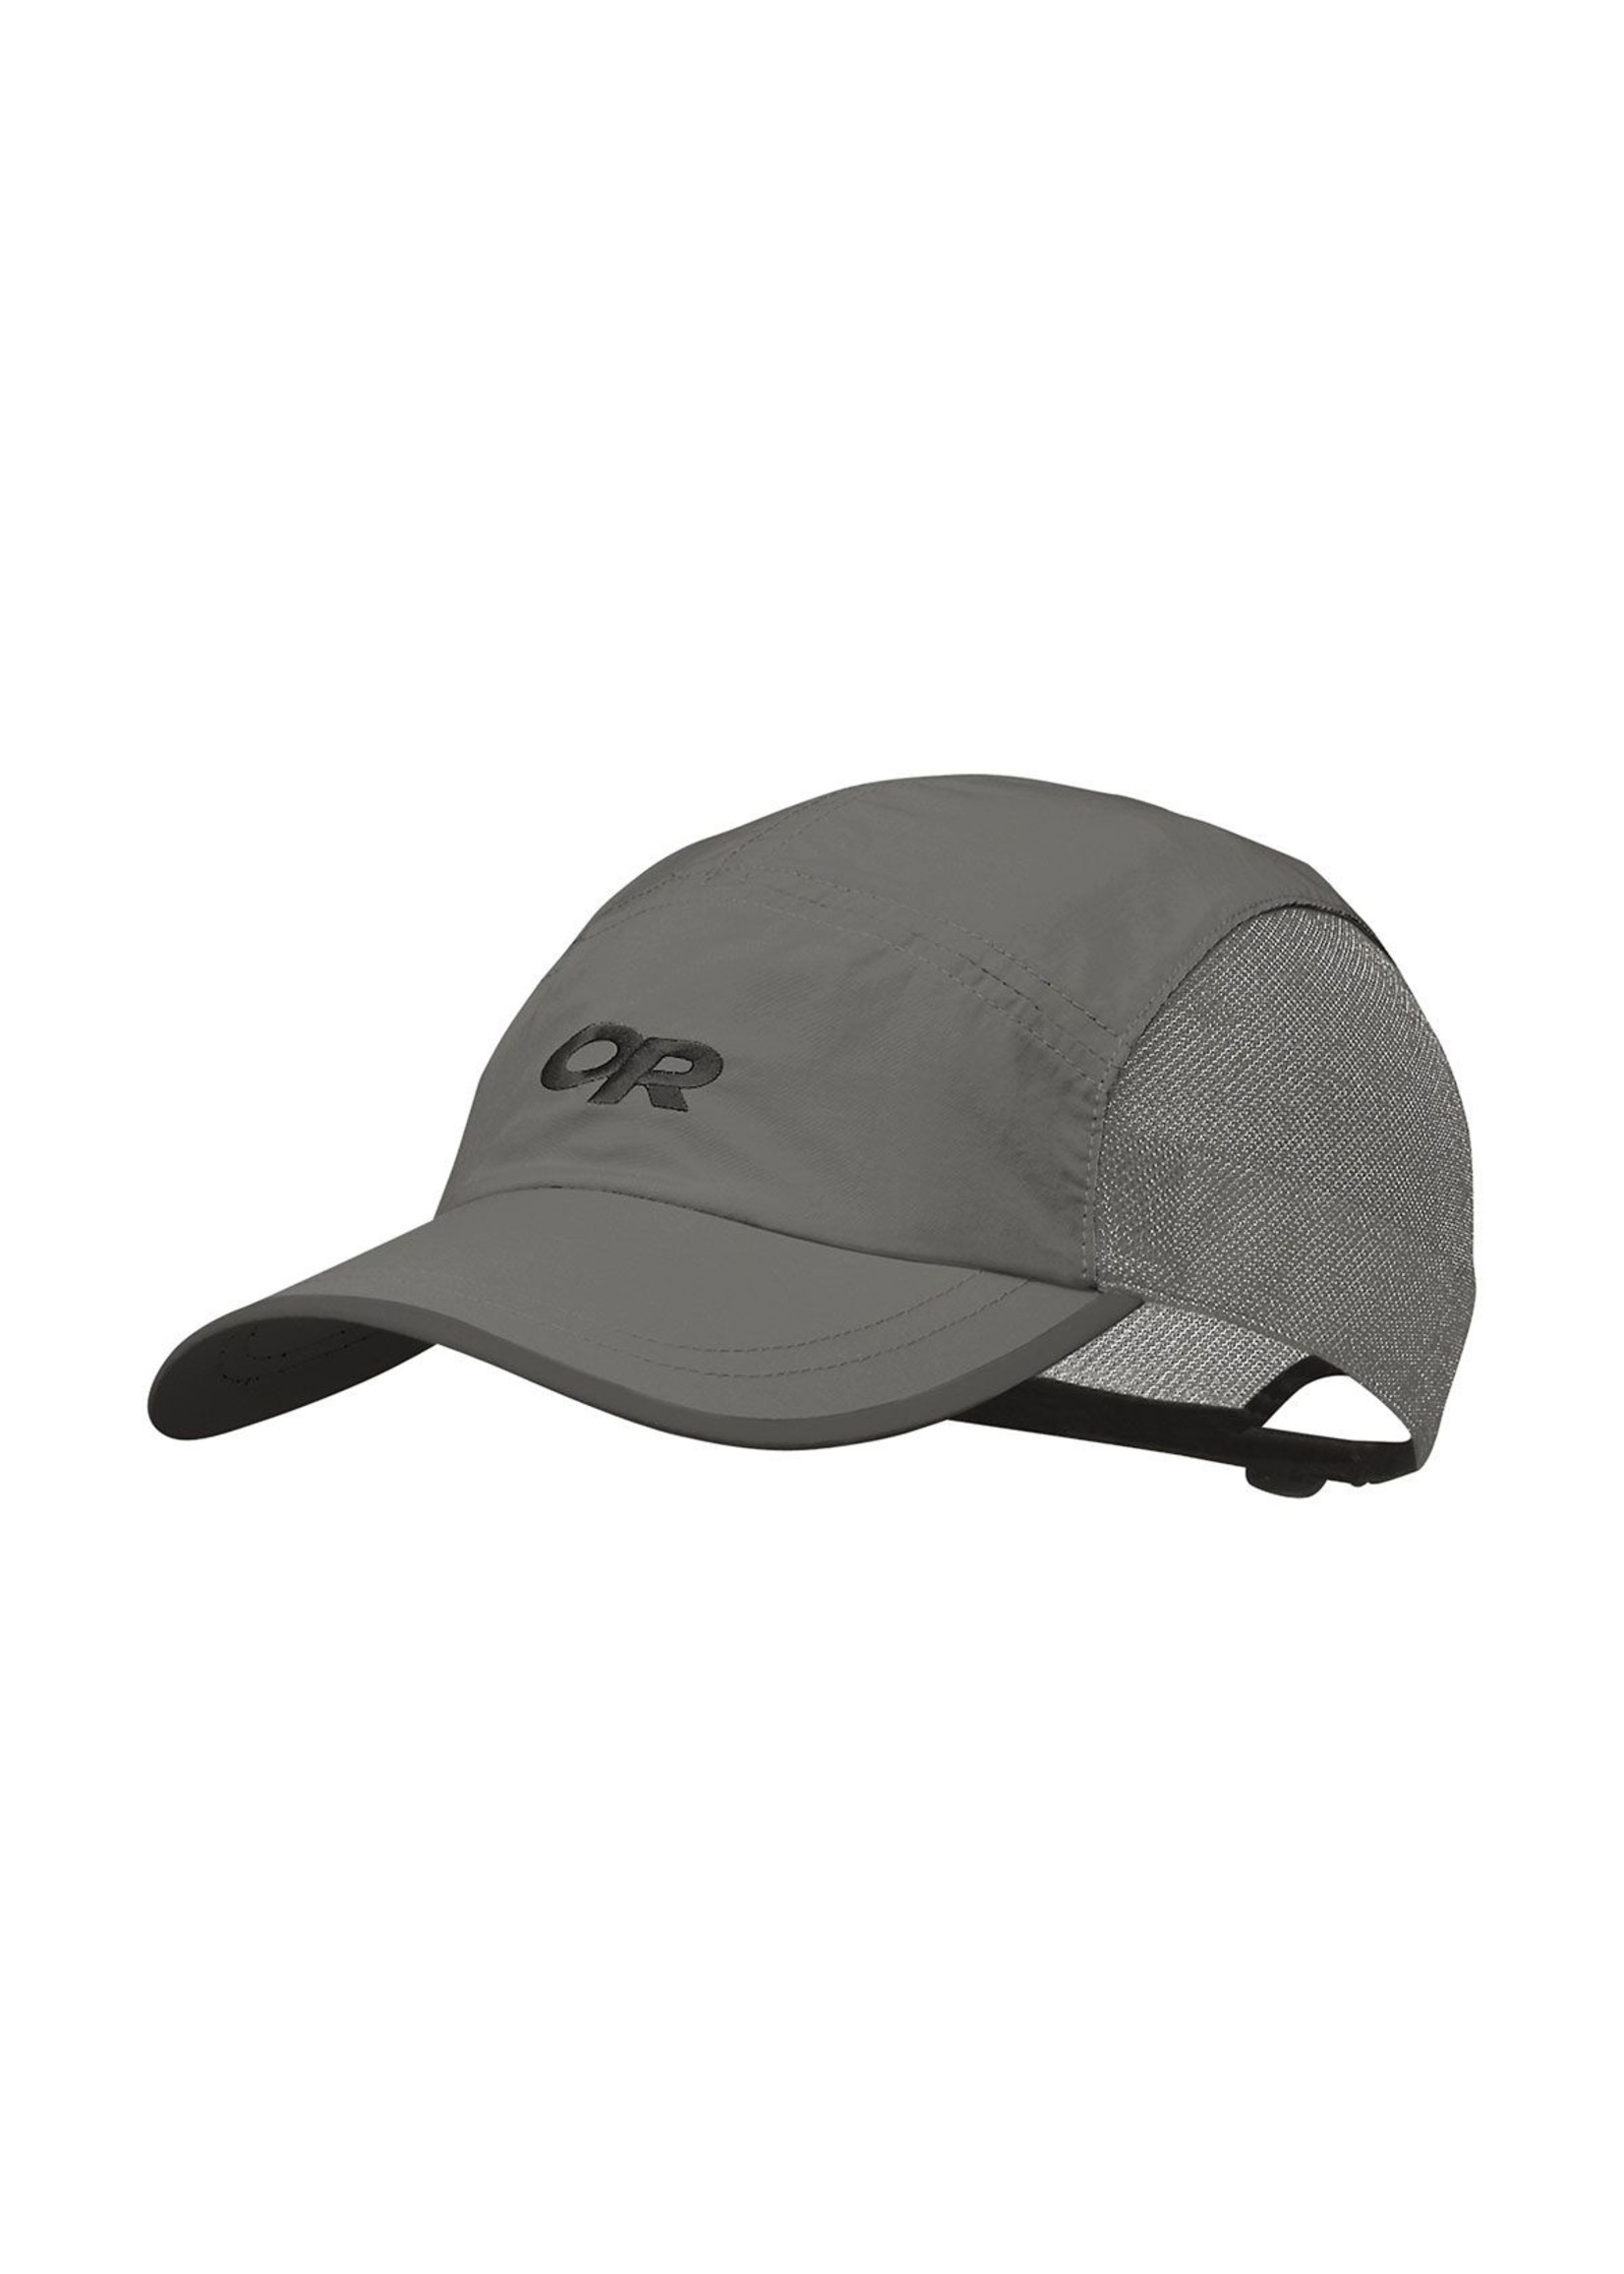 OUTDOOR RESEARCH Casquette Swift avec protection solaire-Unisexe